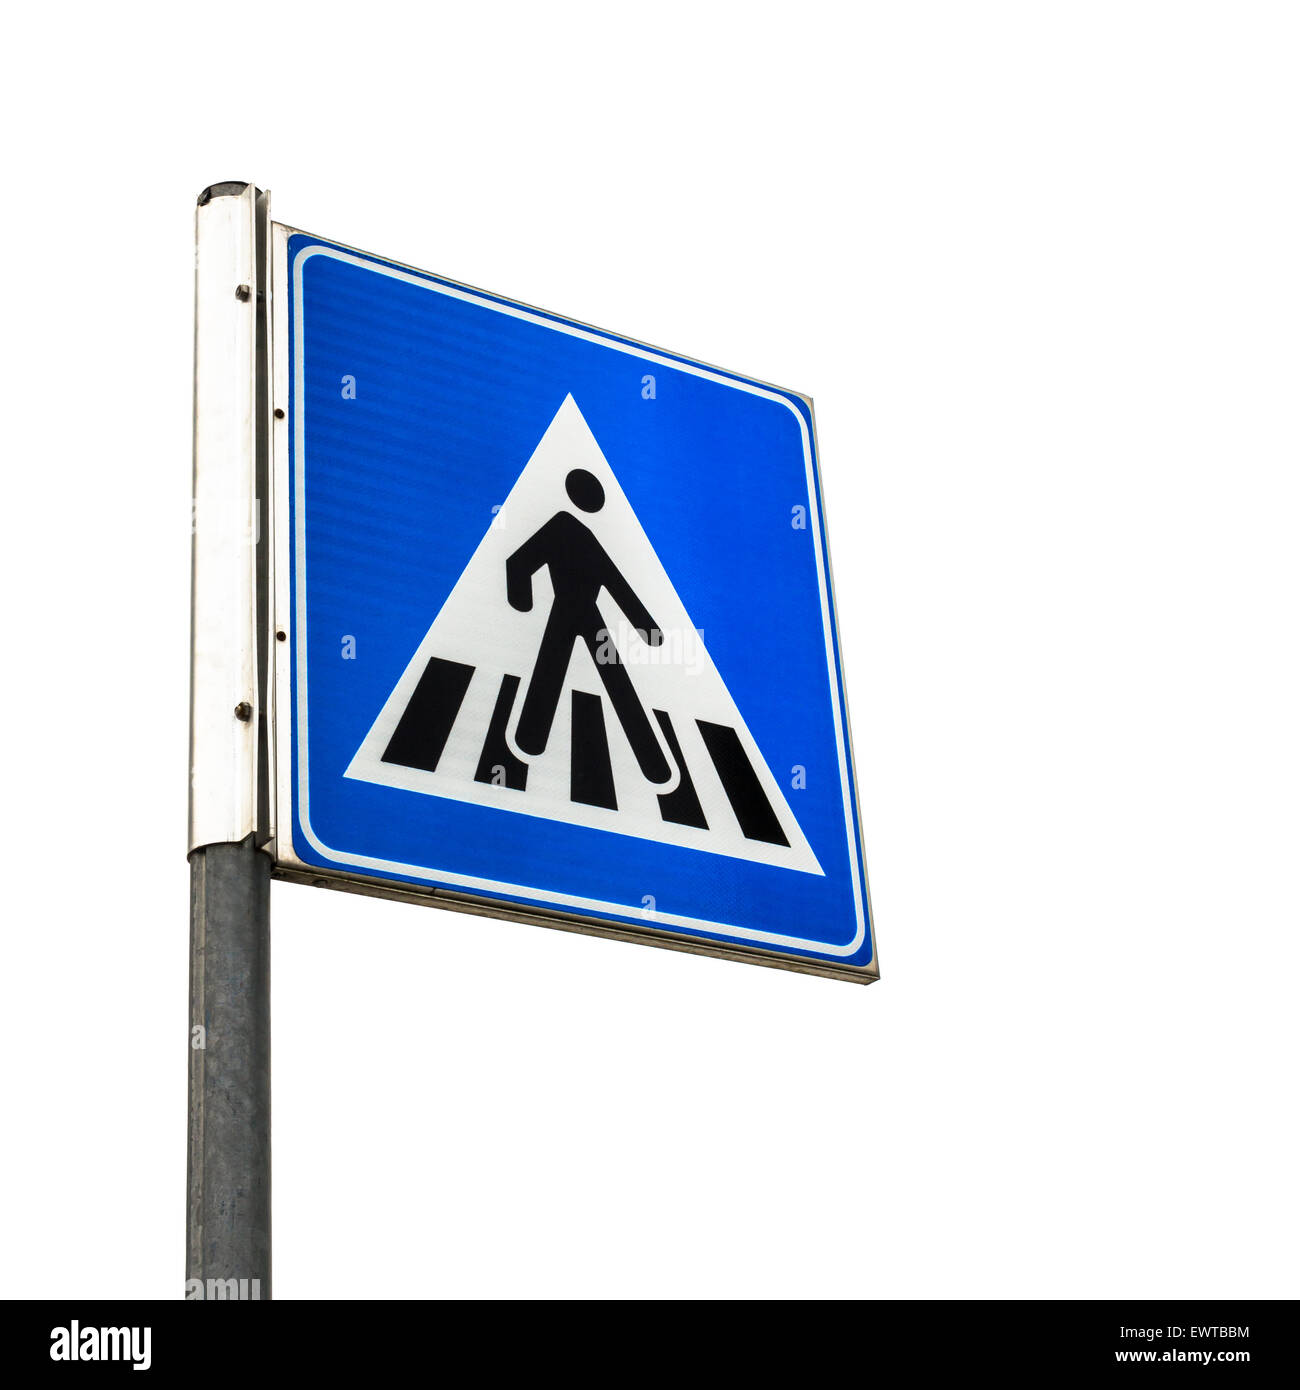 A pedestrian crossing road sign on white background. Stock Photo